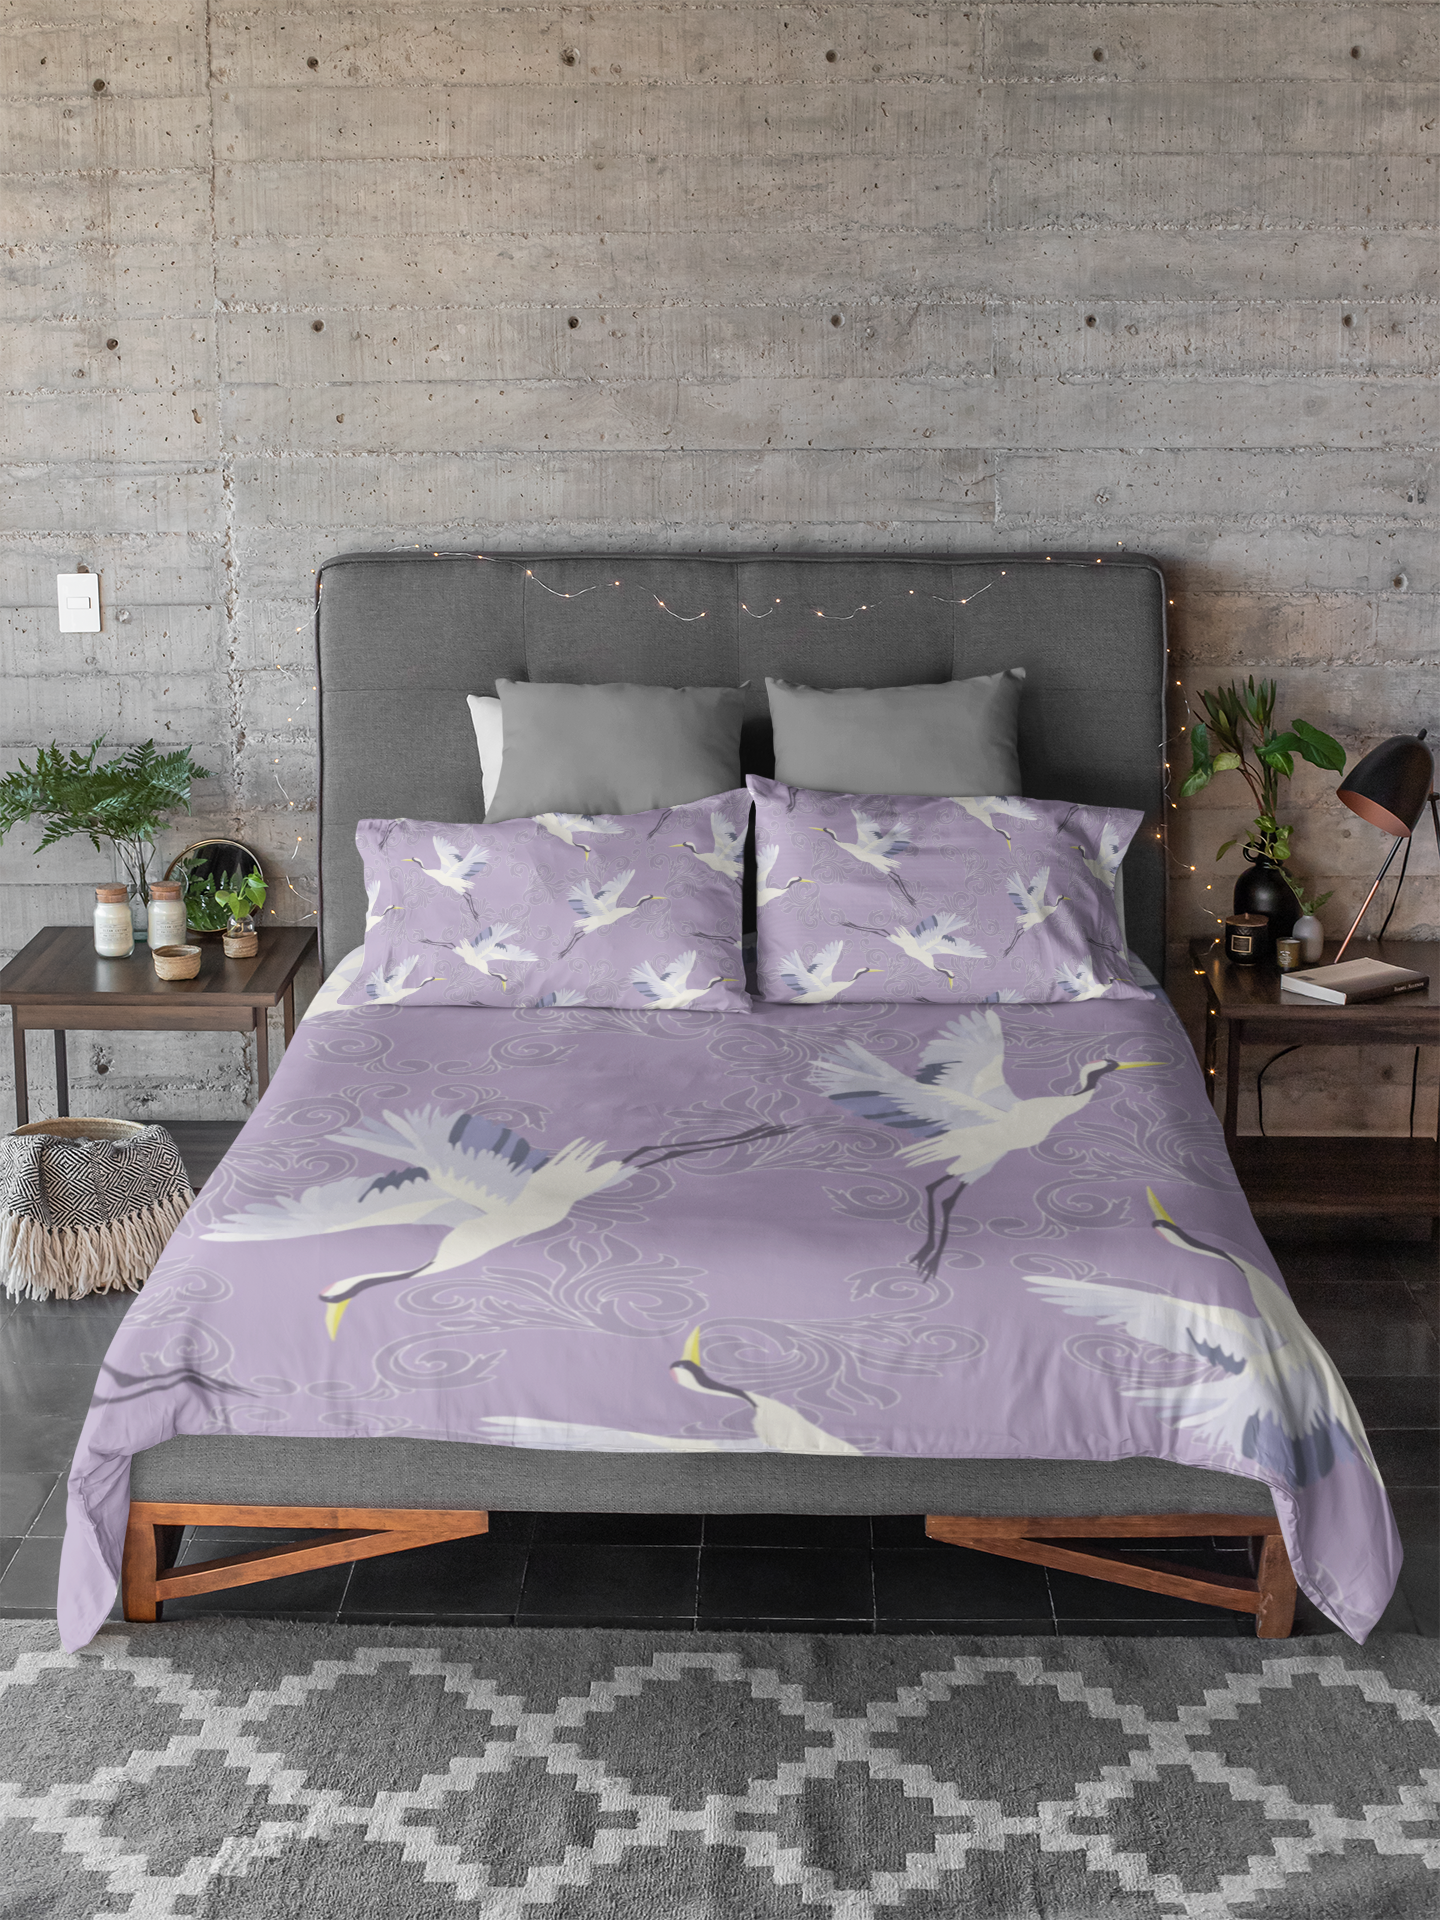 duvet-cover-mockup-featuring-two-bed-pillows-31291 (5).png